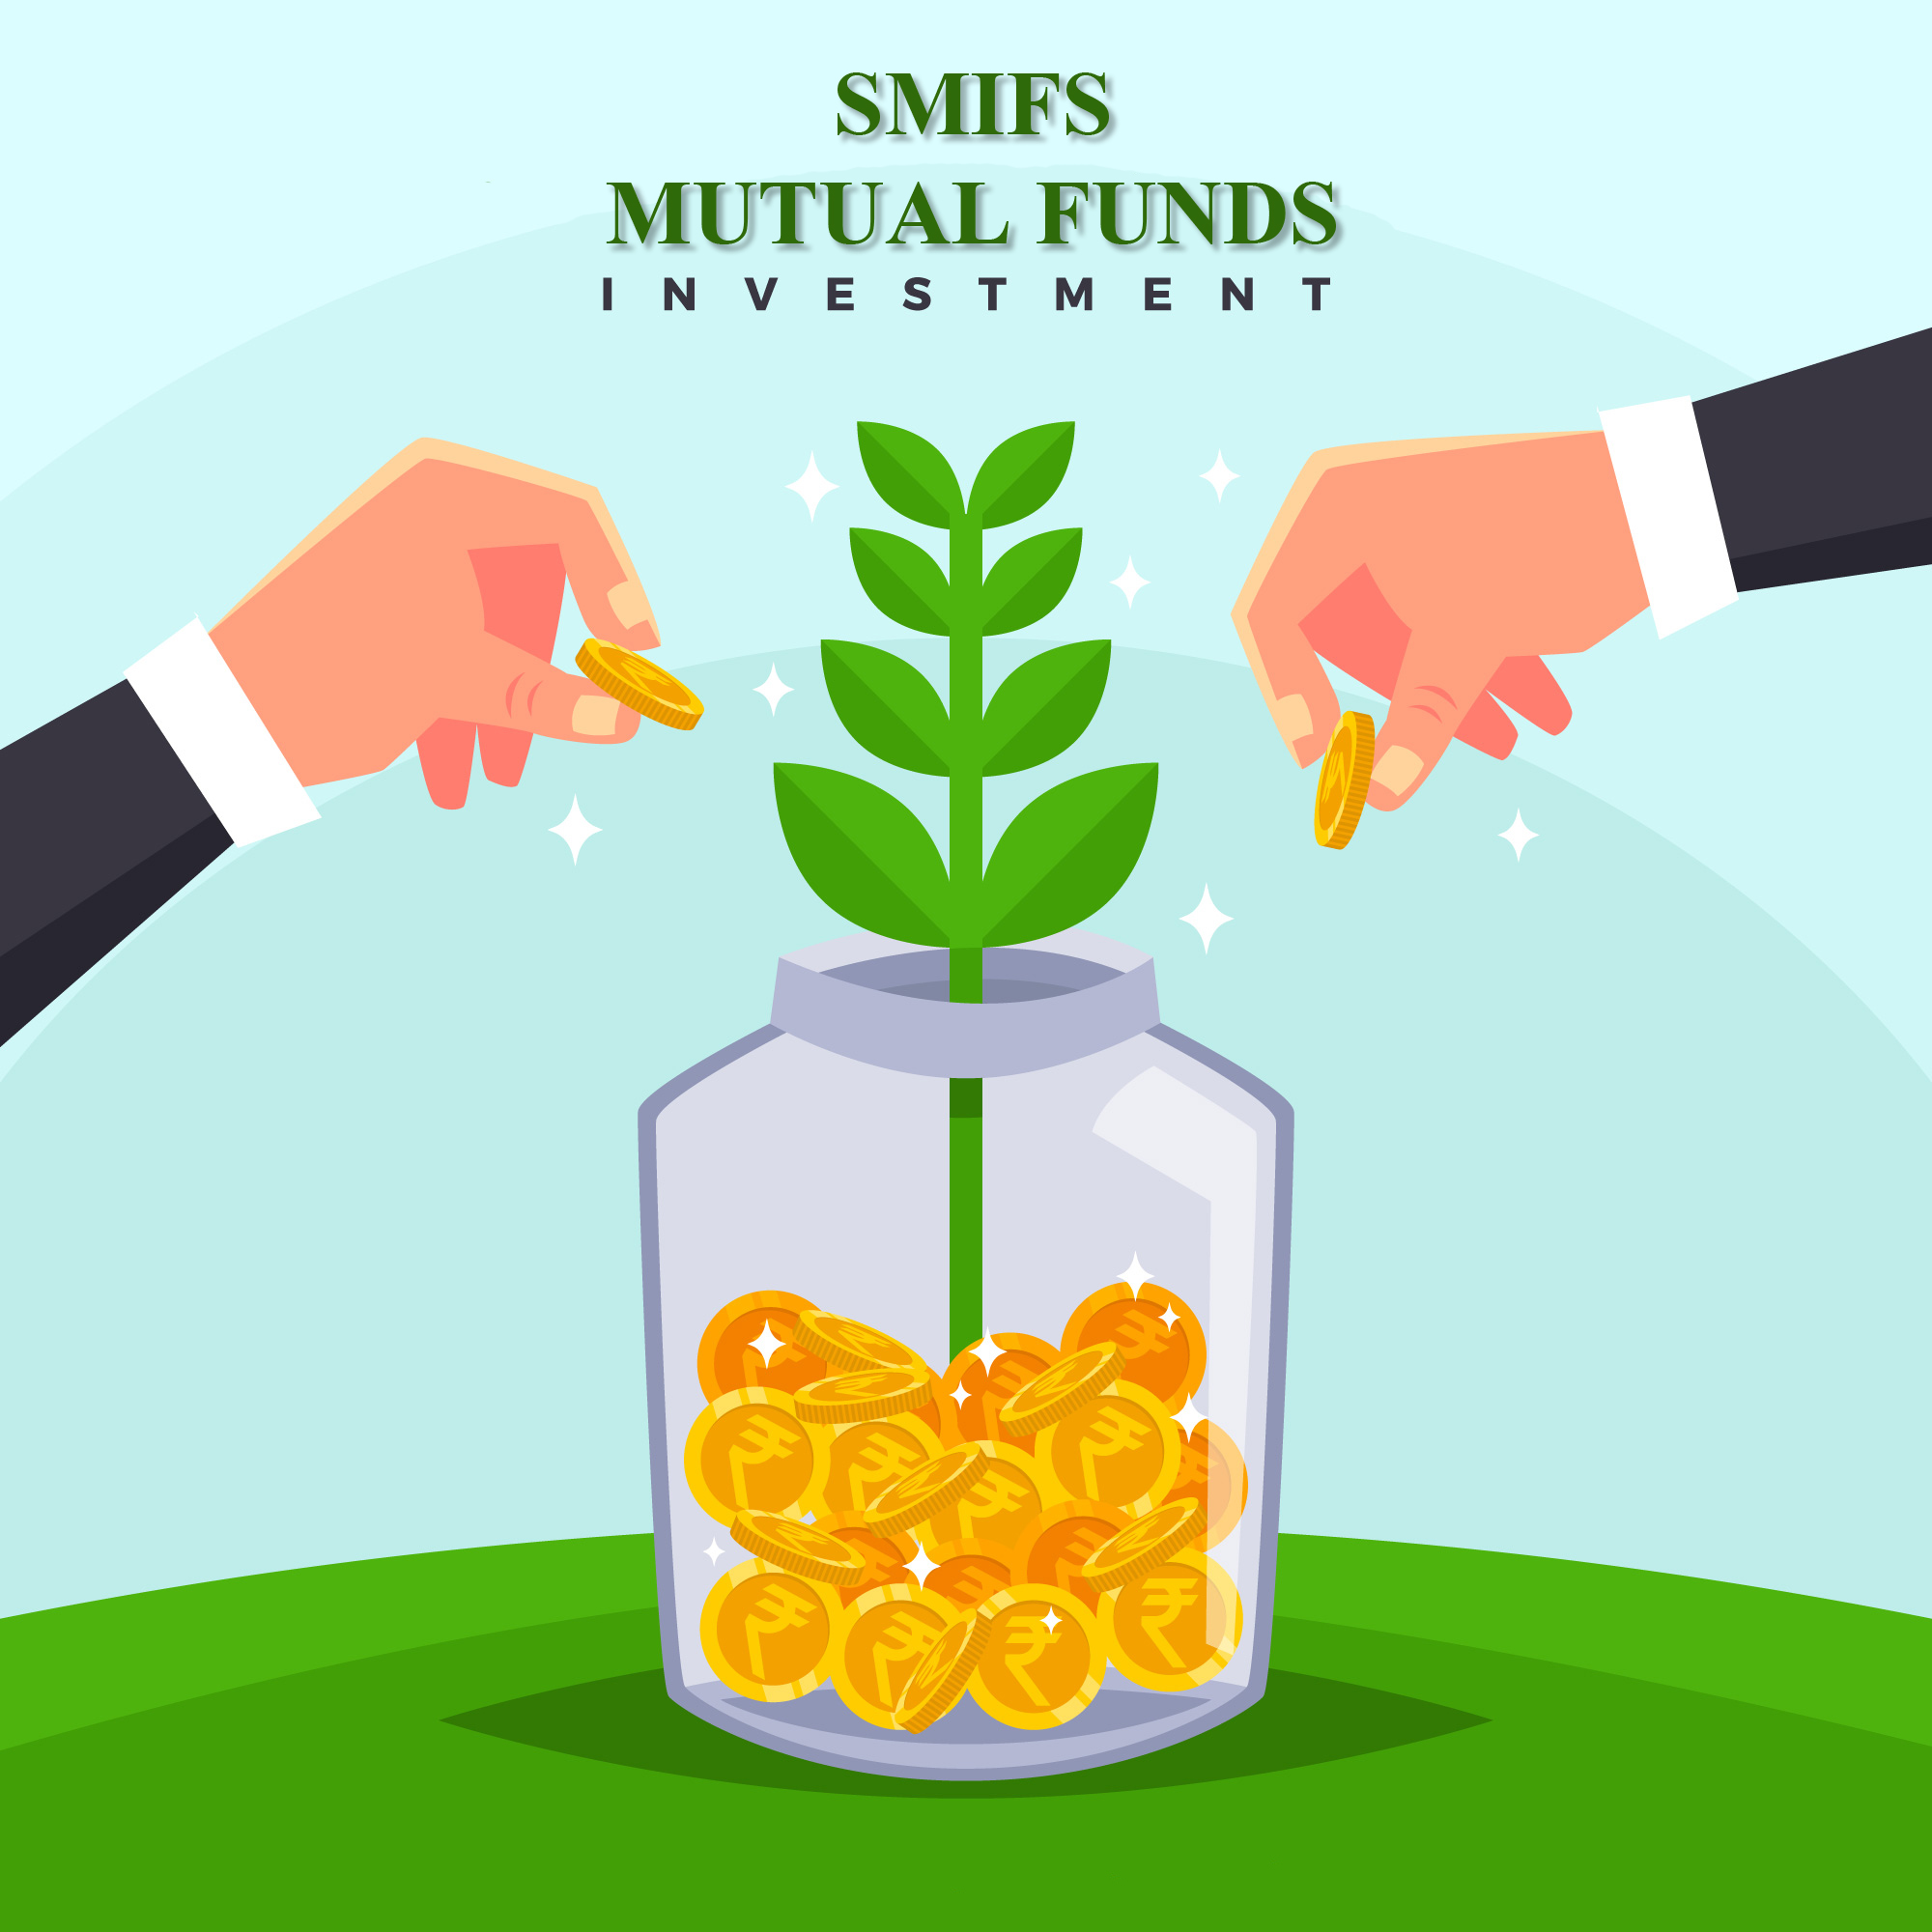 Why invest with smifs